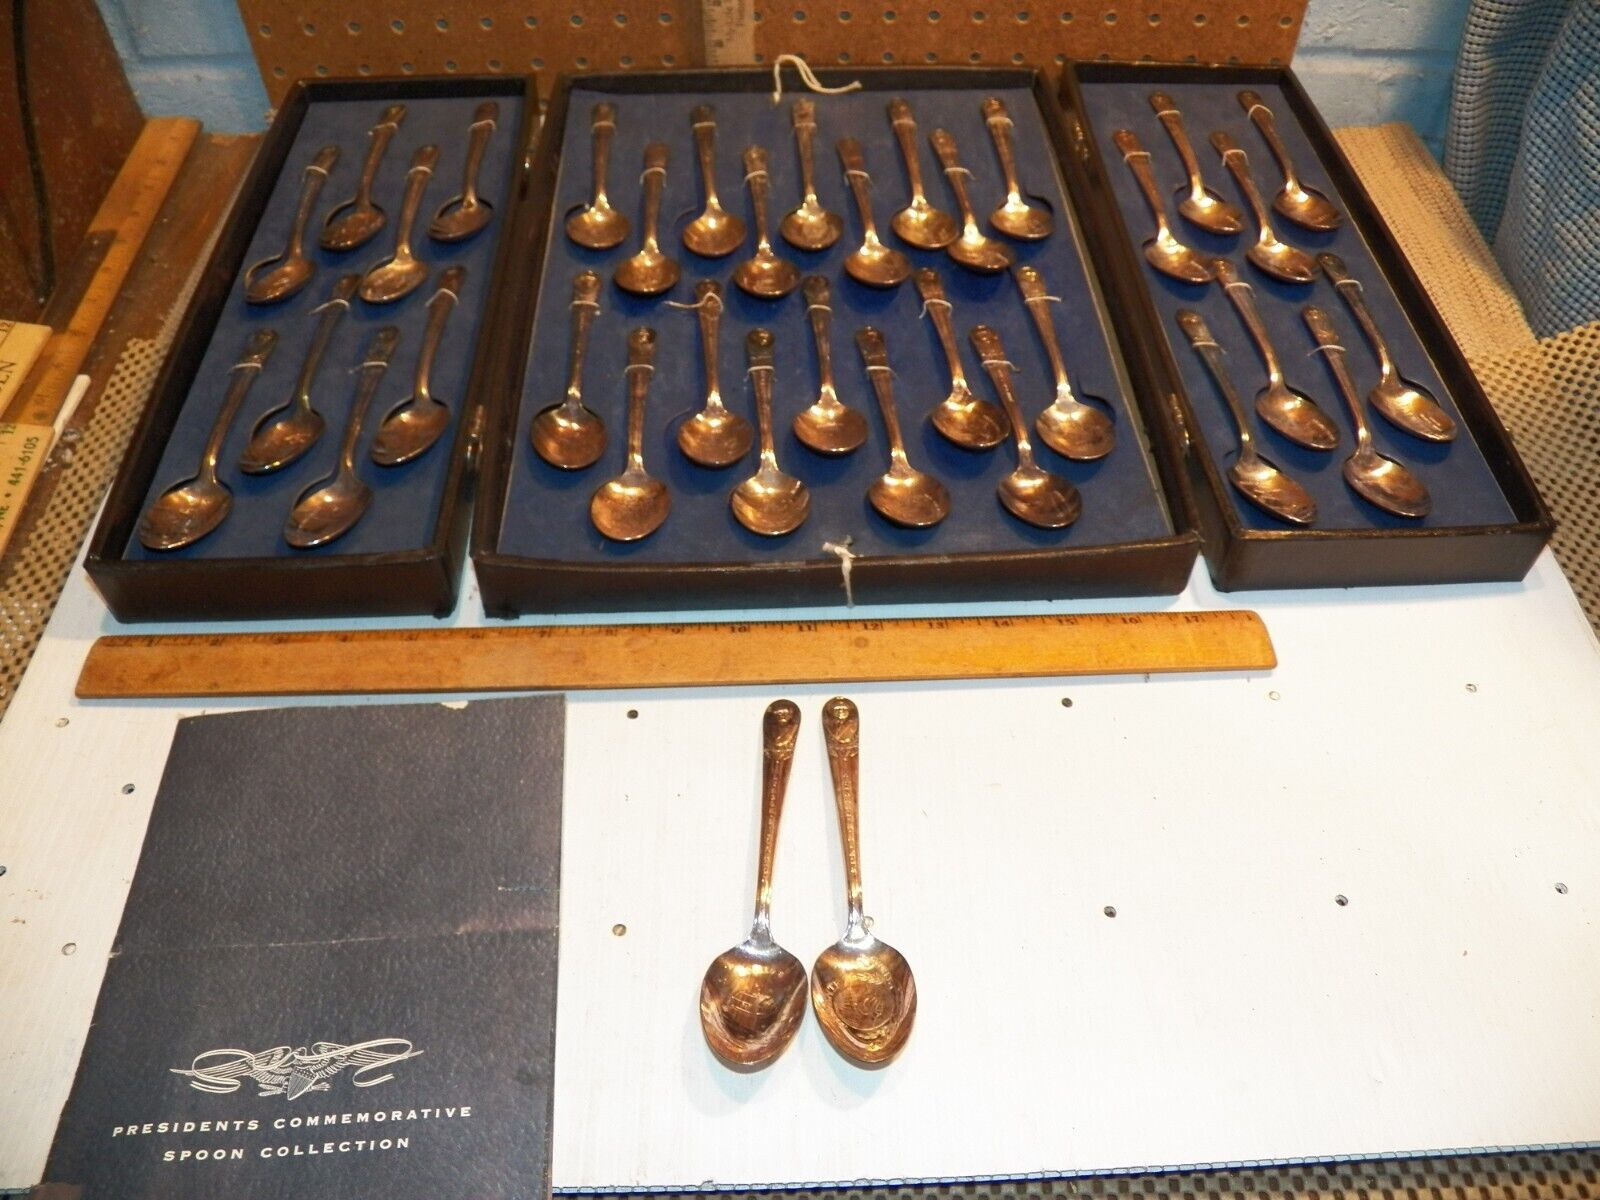 Vintage WM ROGERS 36 Pc Silver Plated Presidents Commemorative Spoon Collection